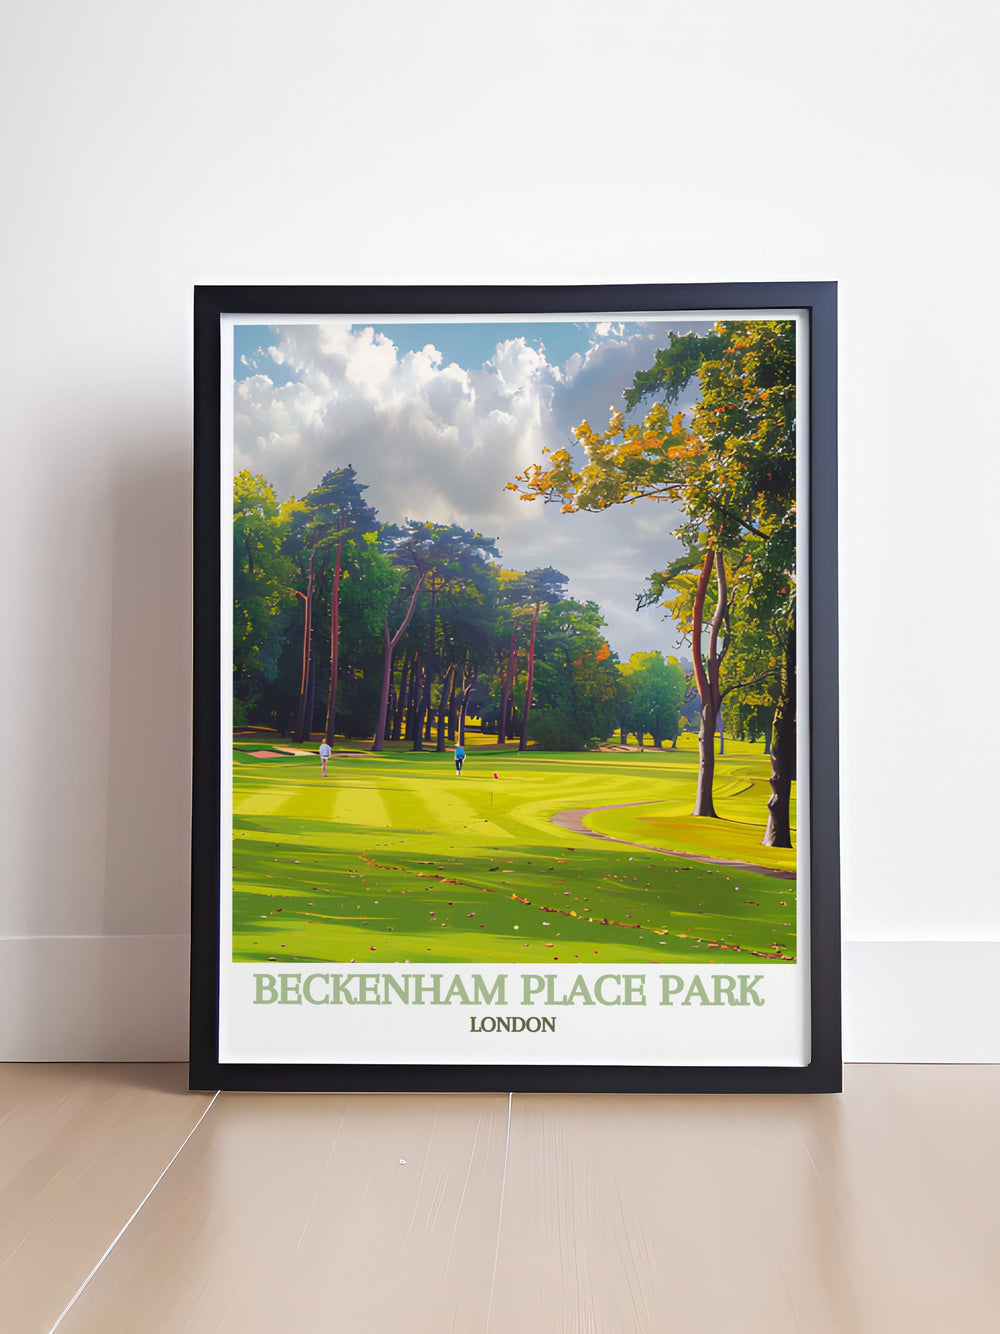 Framed art of the golf course at Beckenham Place Park, highlighting the manicured greens and picturesque setting surrounded by ancient trees, ideal for golf lovers and nature enthusiasts looking to add a sophisticated touch to their home decor.